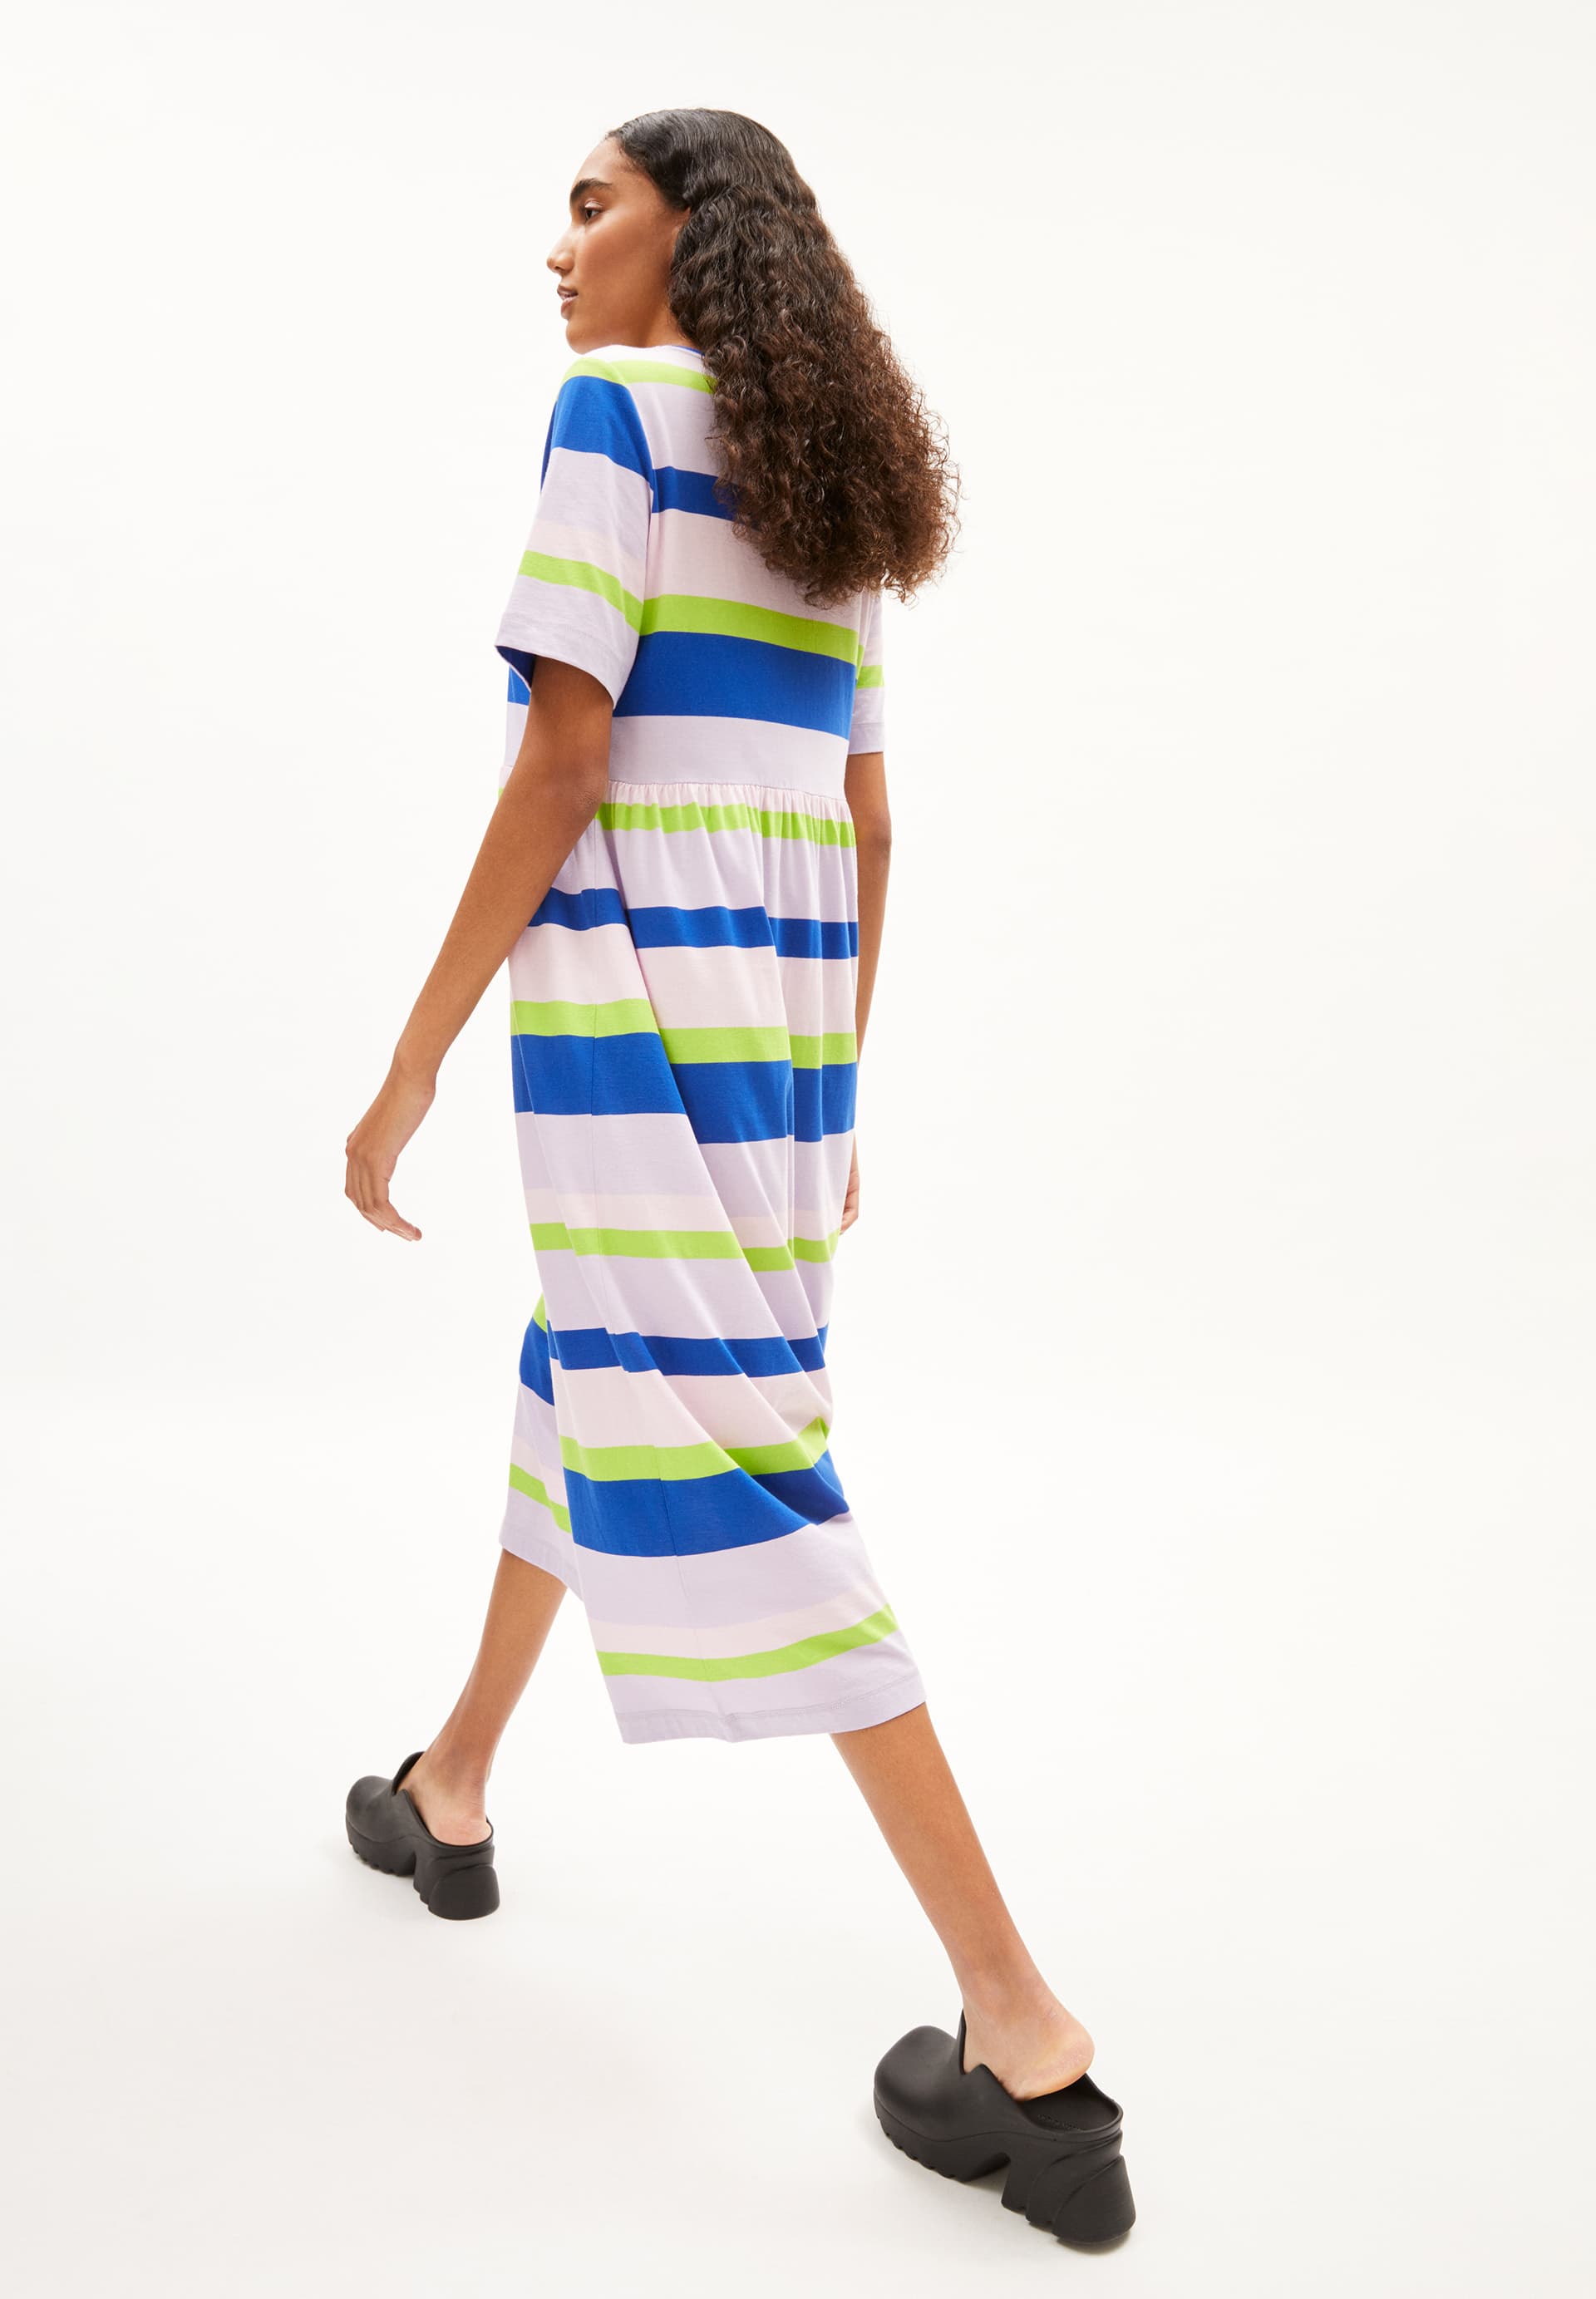 TAAKYRA HORAACIOS Jersey Dress Loose Fit made of Organic Cotton